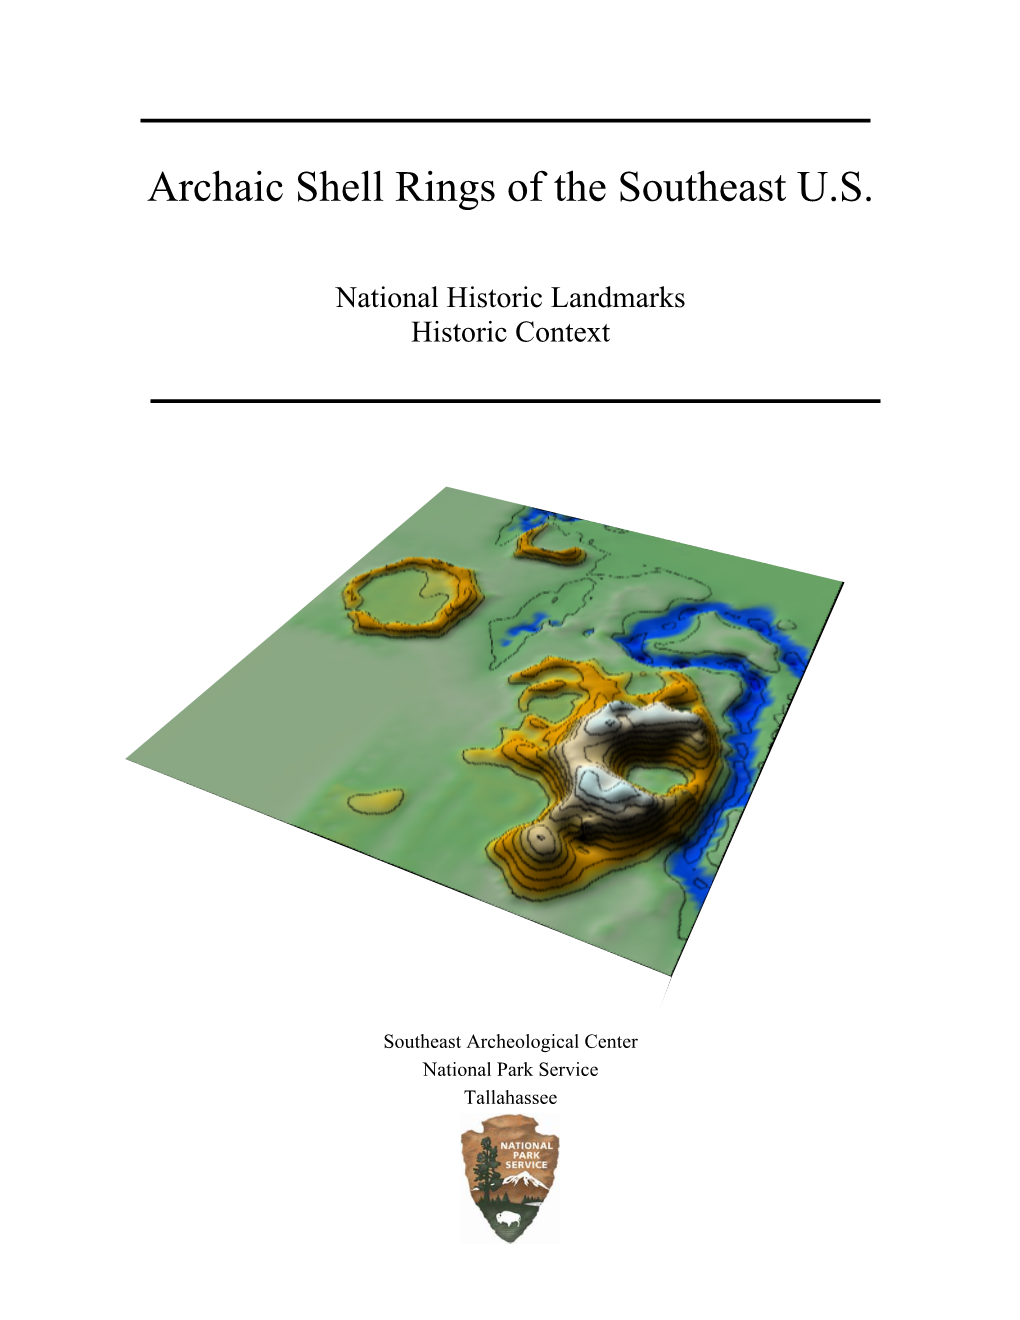 Archaic Shell Rings of the Southeast U.S